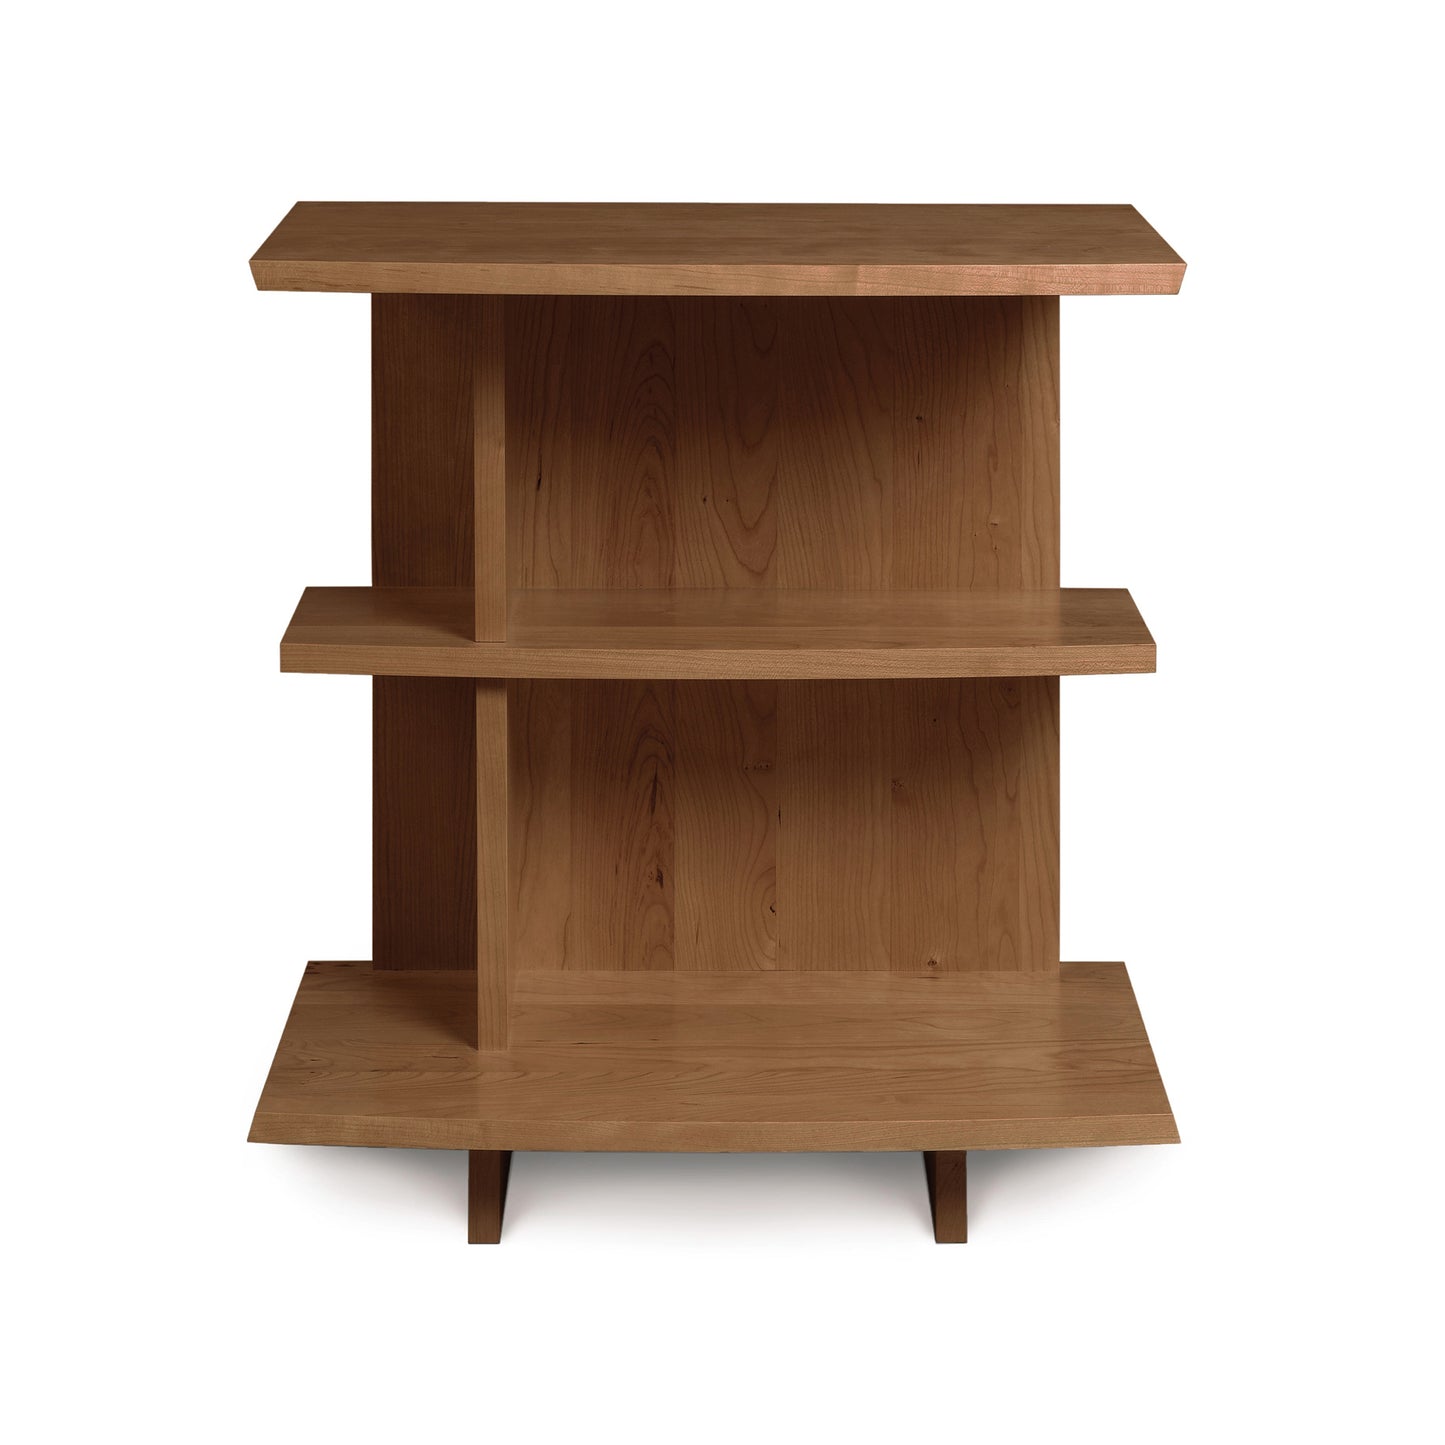 A Copeland Furniture Berkeley Open Shelf Nightstand - Left with an asymmetrical design, isolated on a white background.